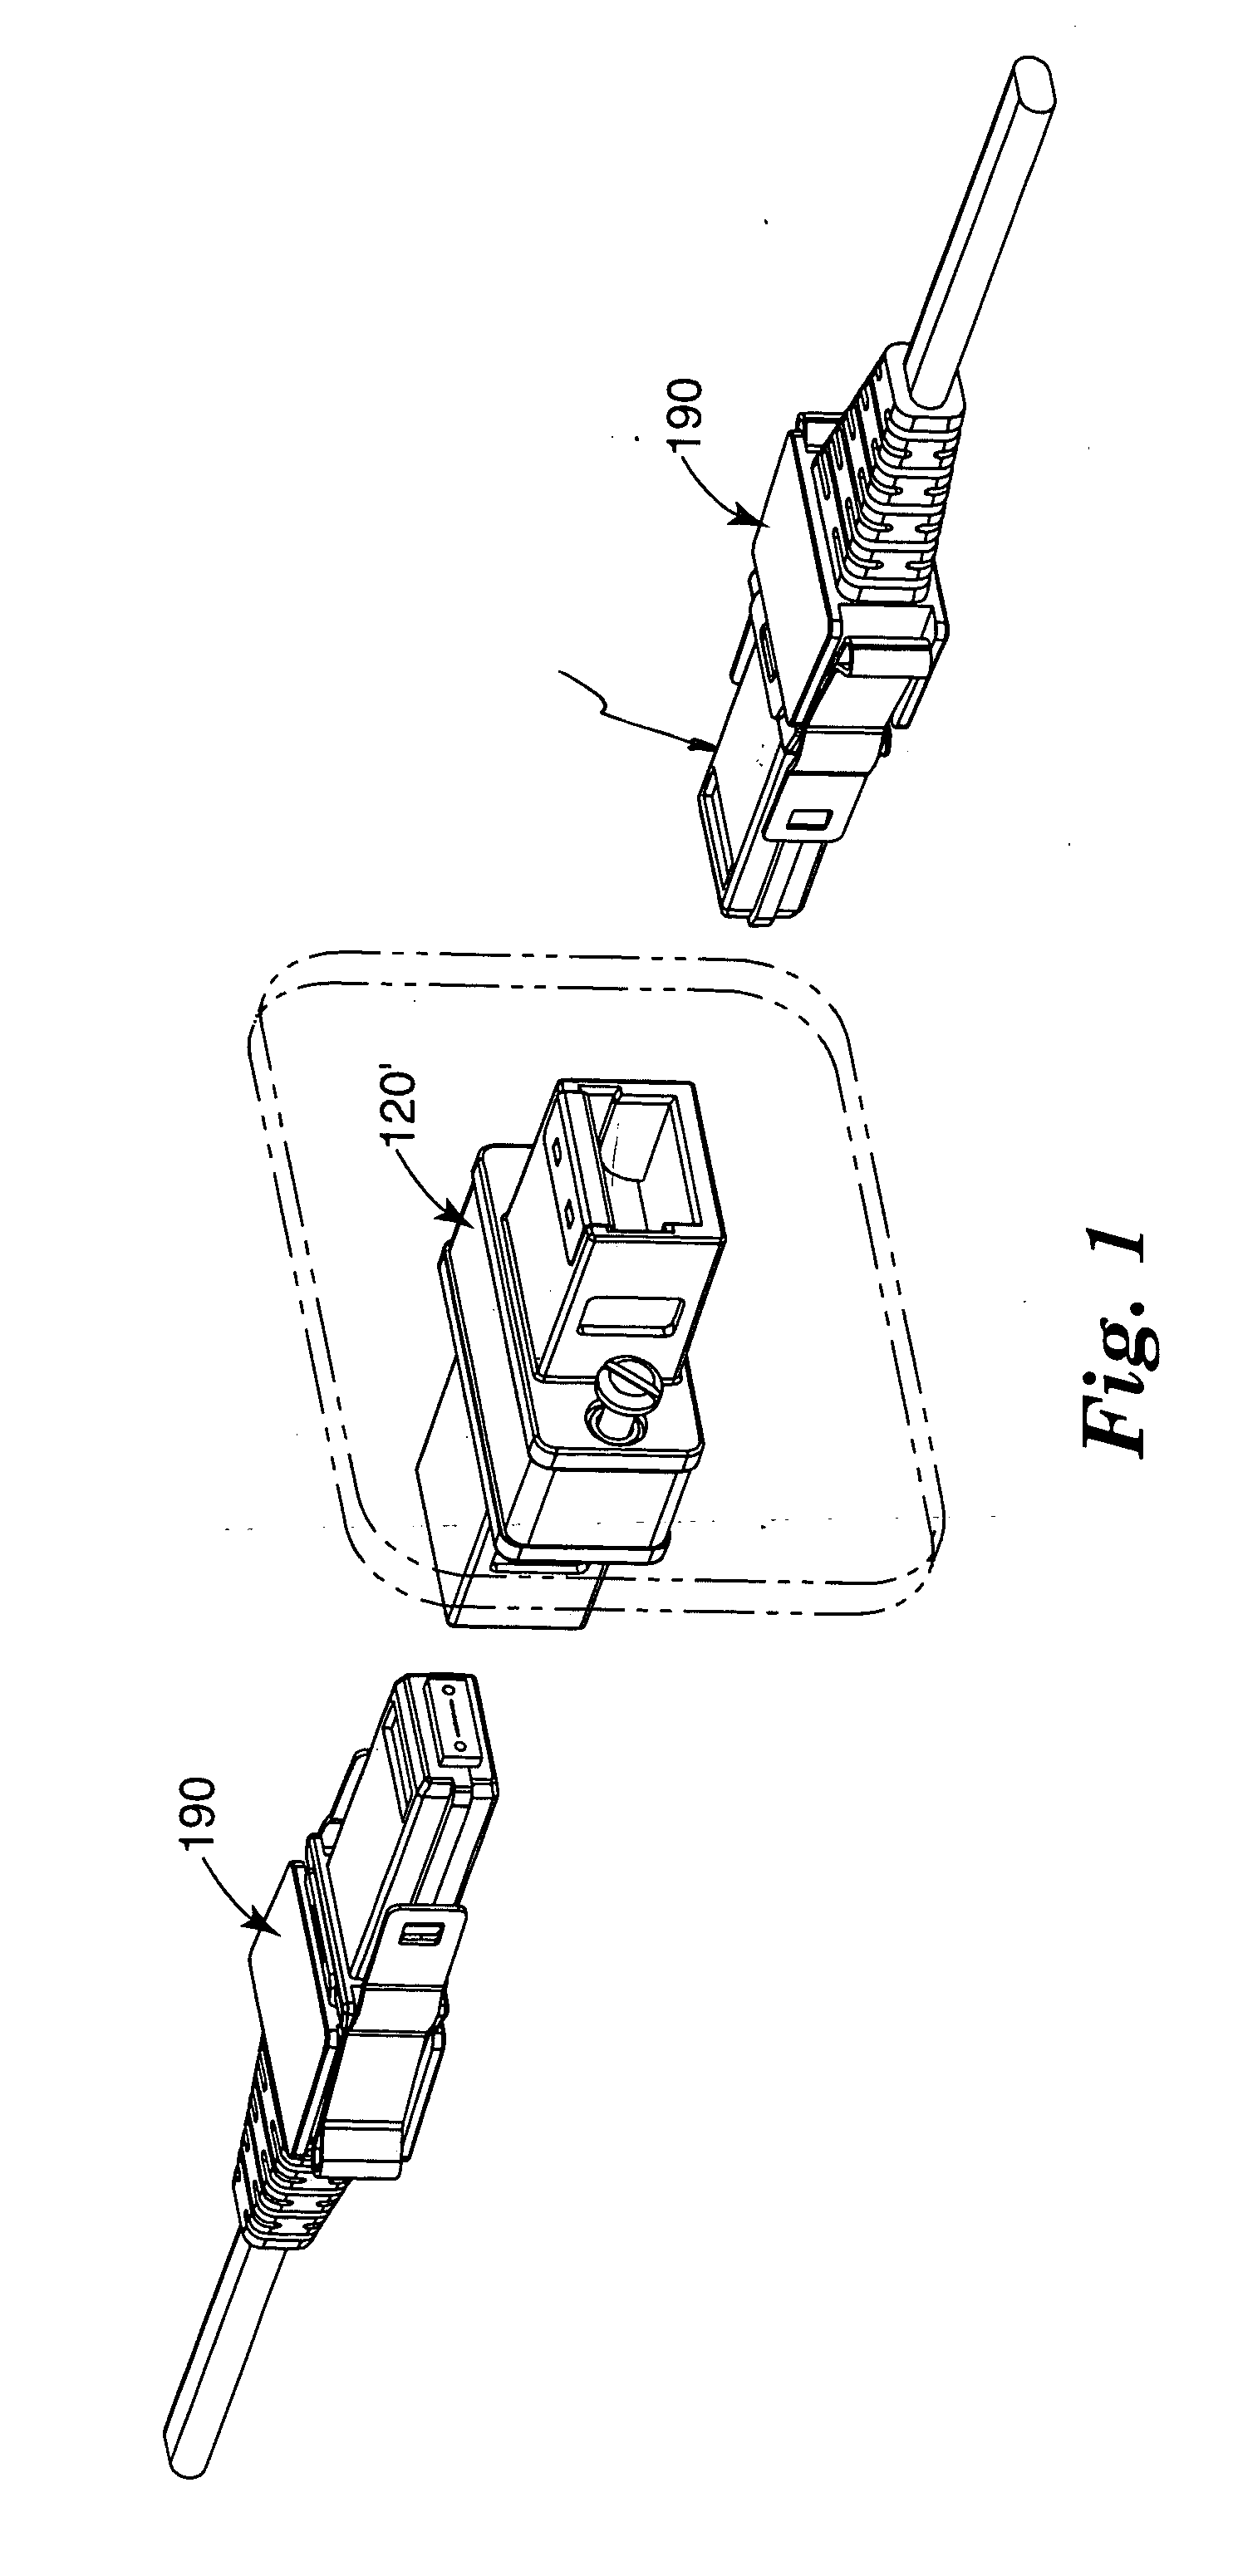 Optical connector system with EMI shielding